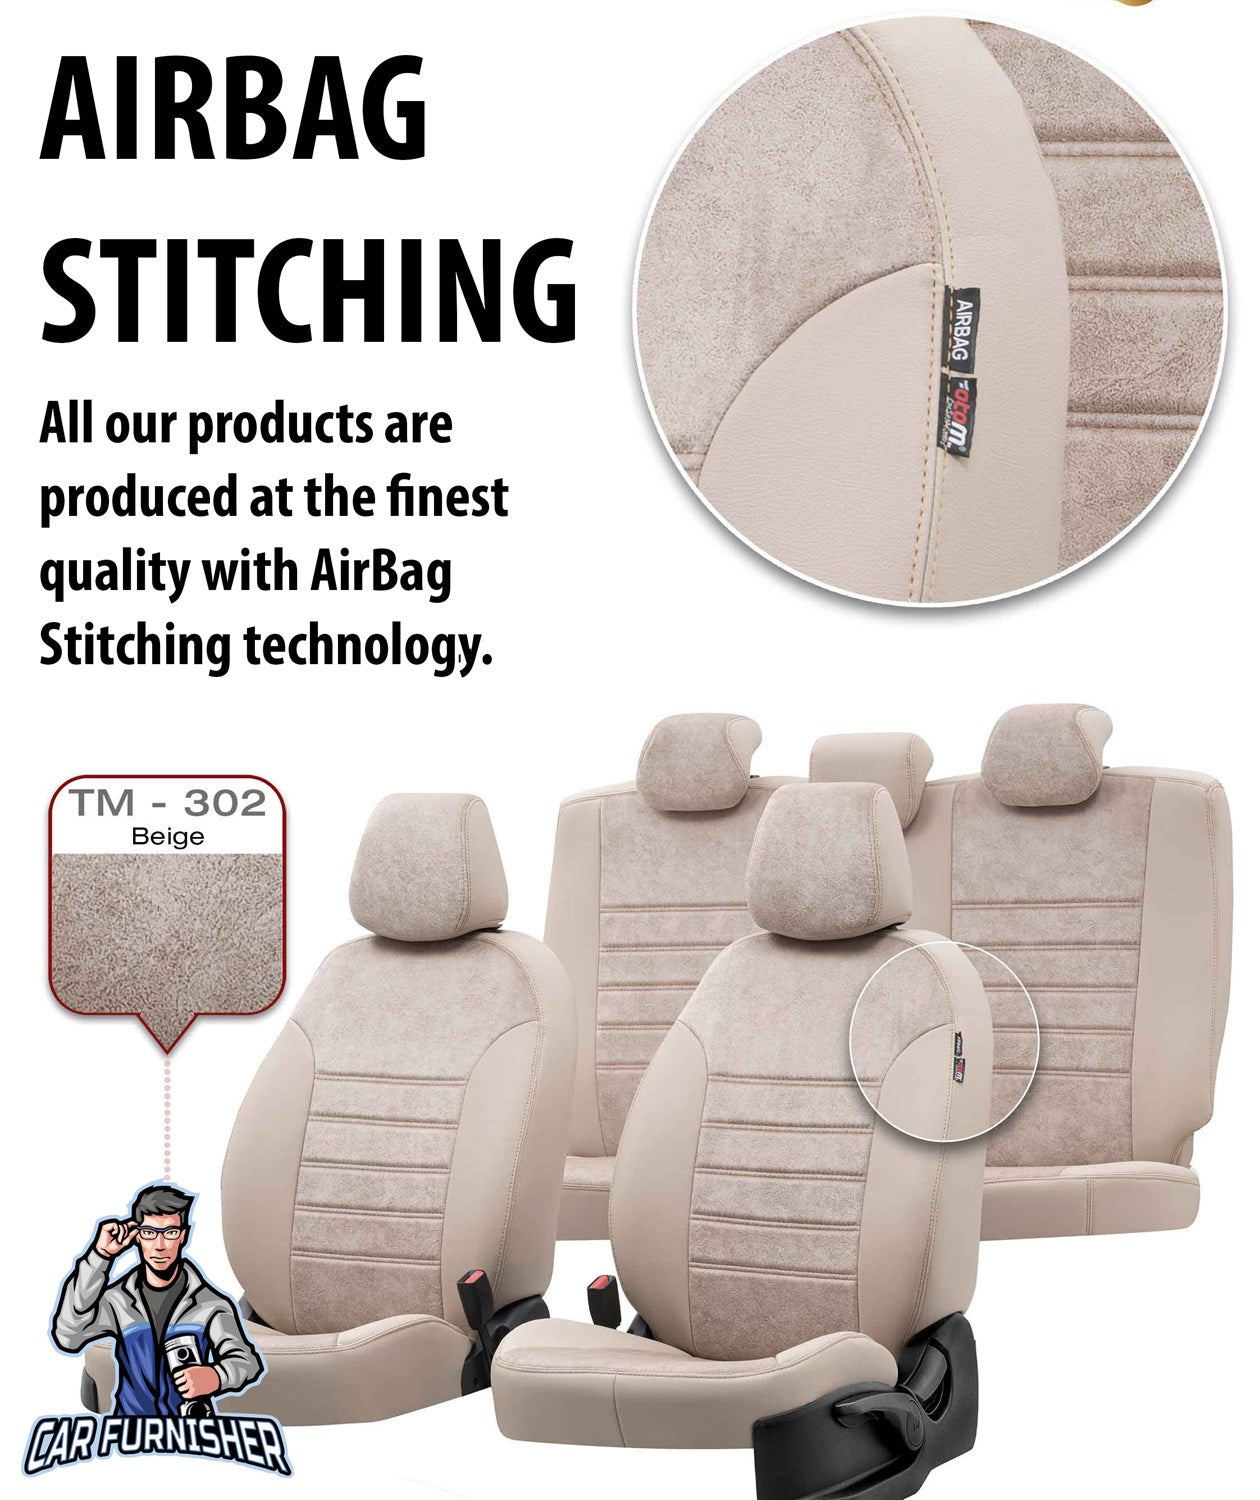 Audi Q7 Seat Cover Milano Suede Design Ivory Leather & Suede Fabric